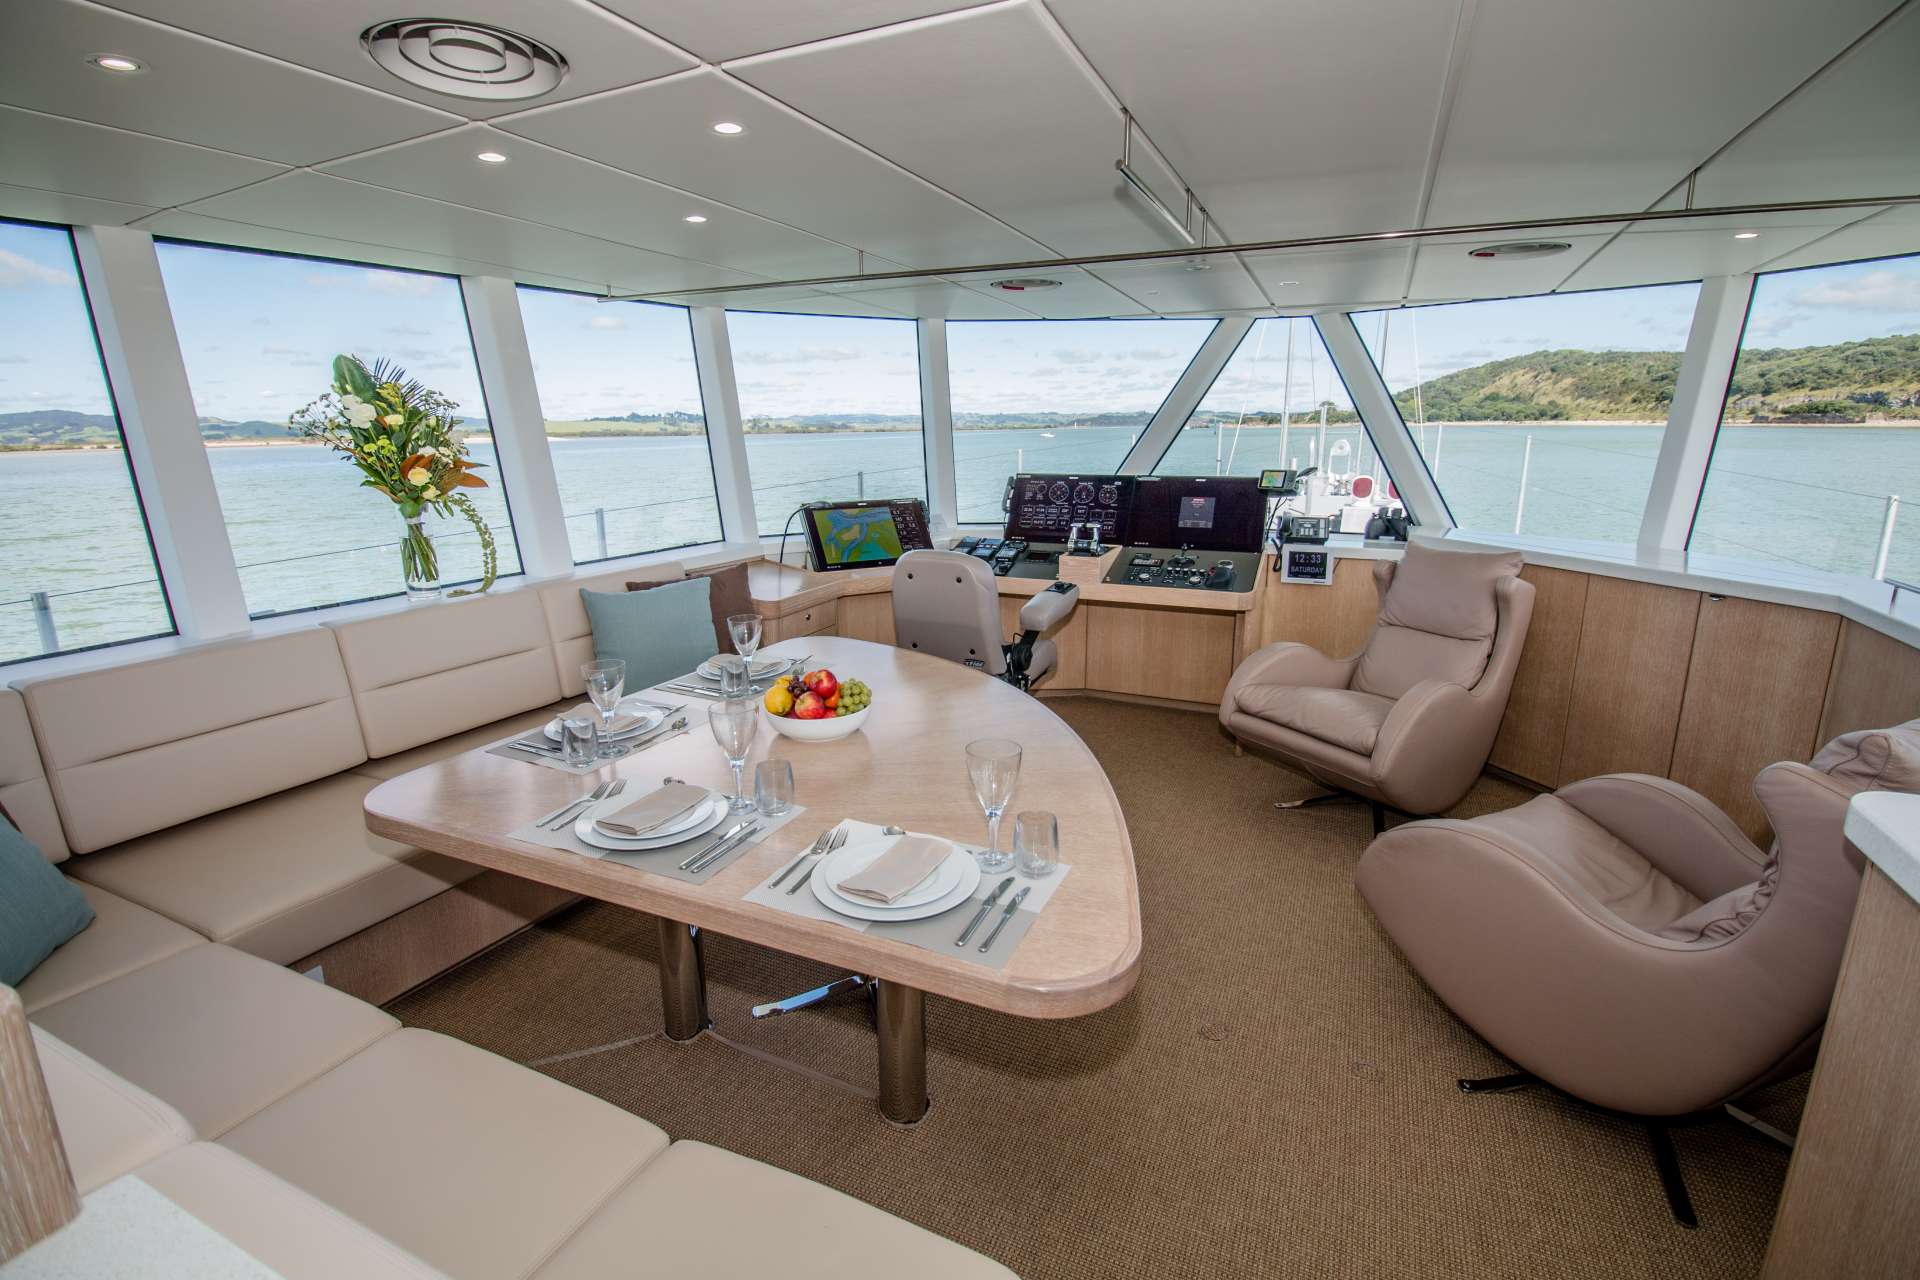 GREY WOLF Yacht Charter - Interiors custom-designed for comfort at sea